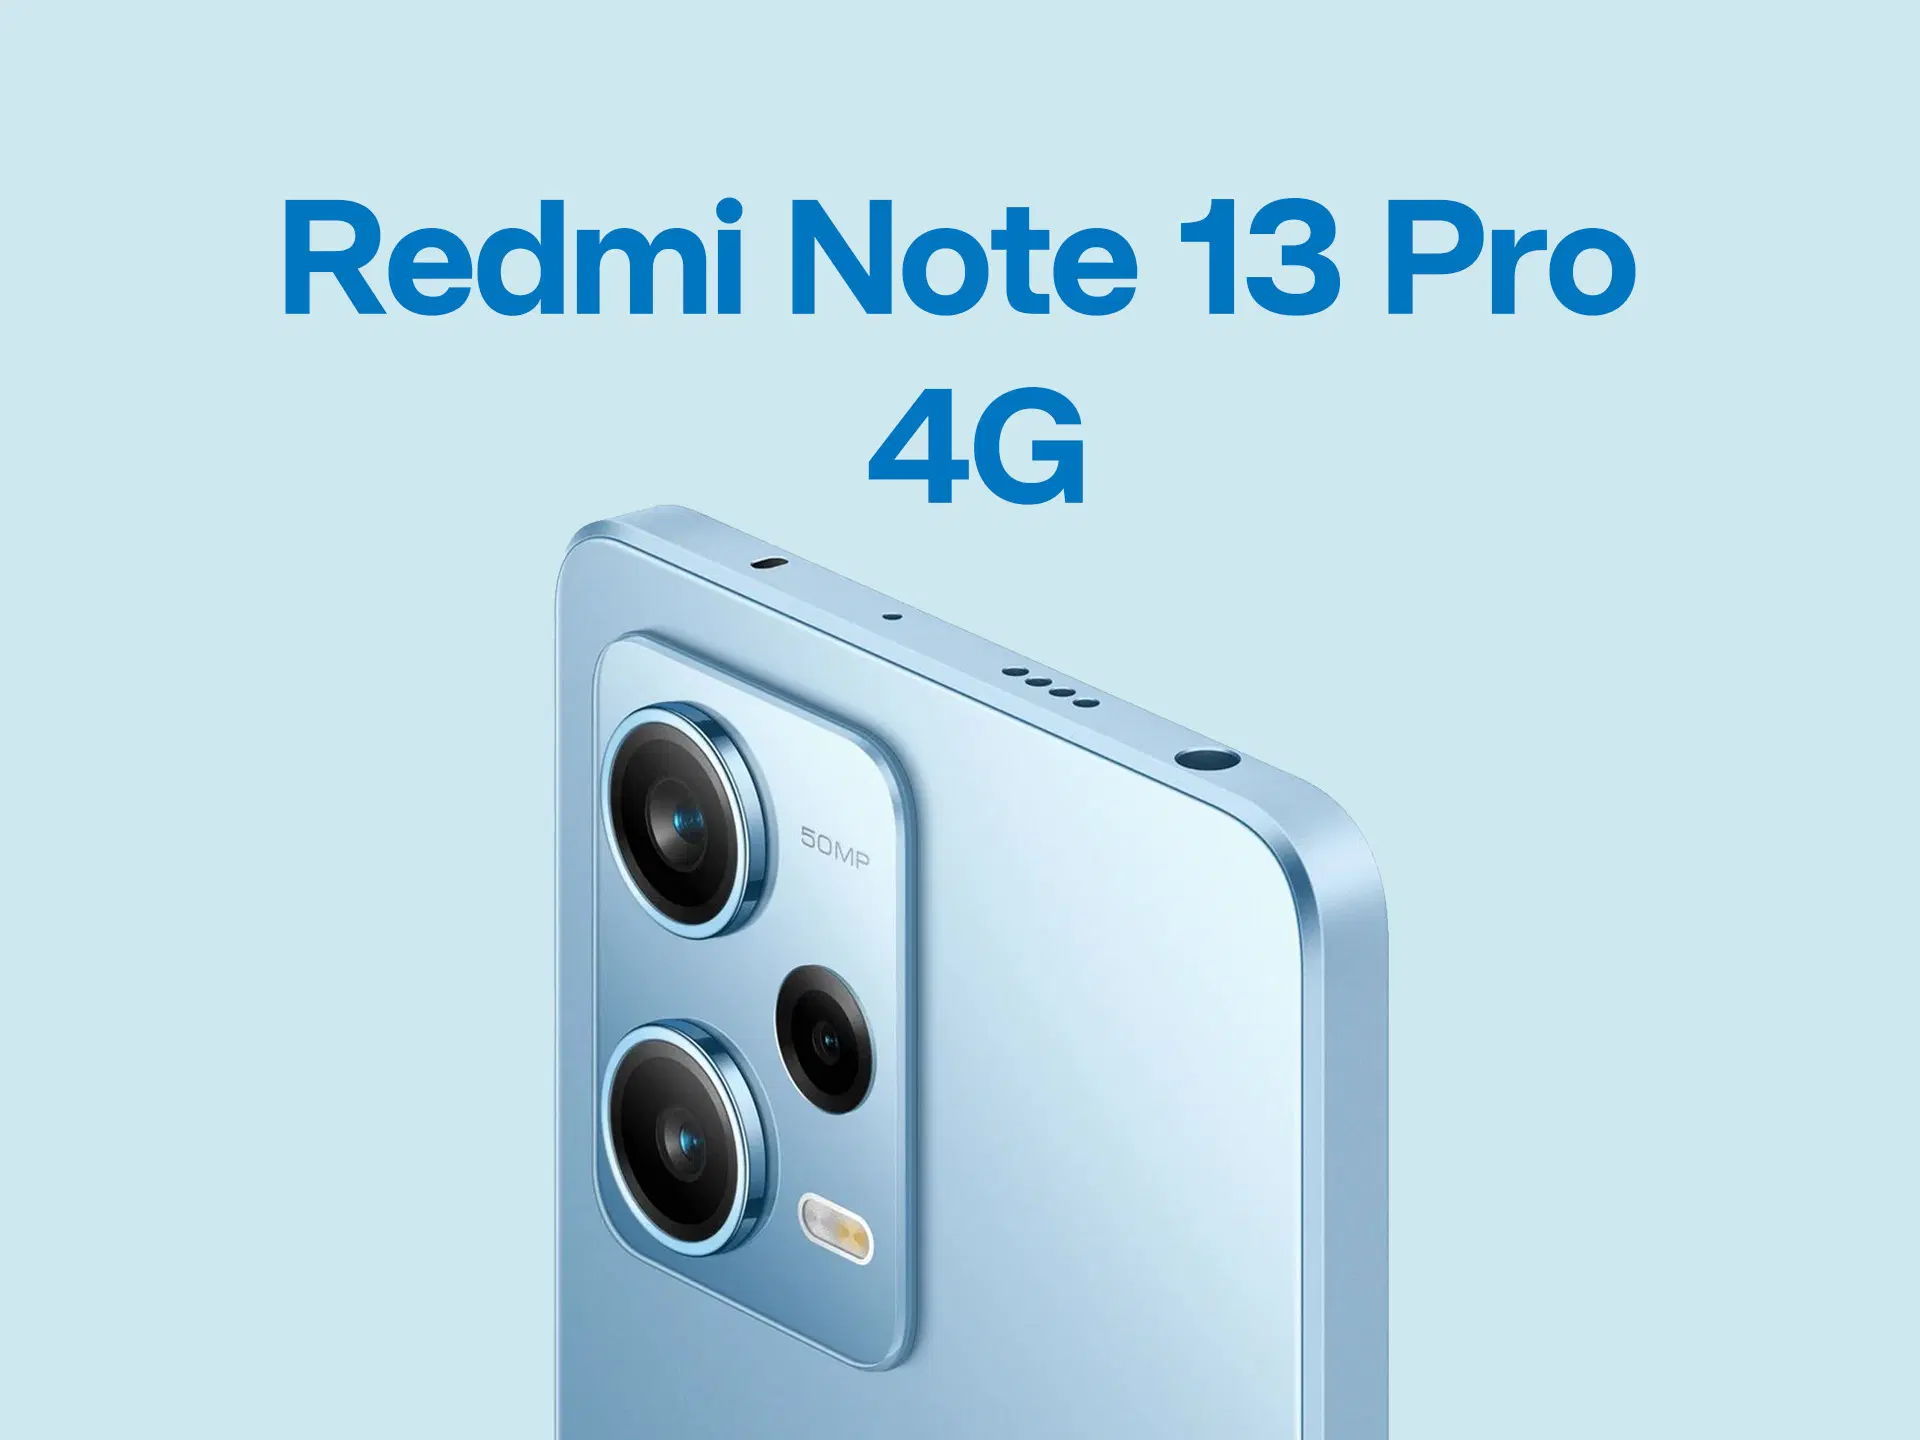 Redmi Note 13 Pro 4G could be on sale soon it has been spotted on the IMEI Database